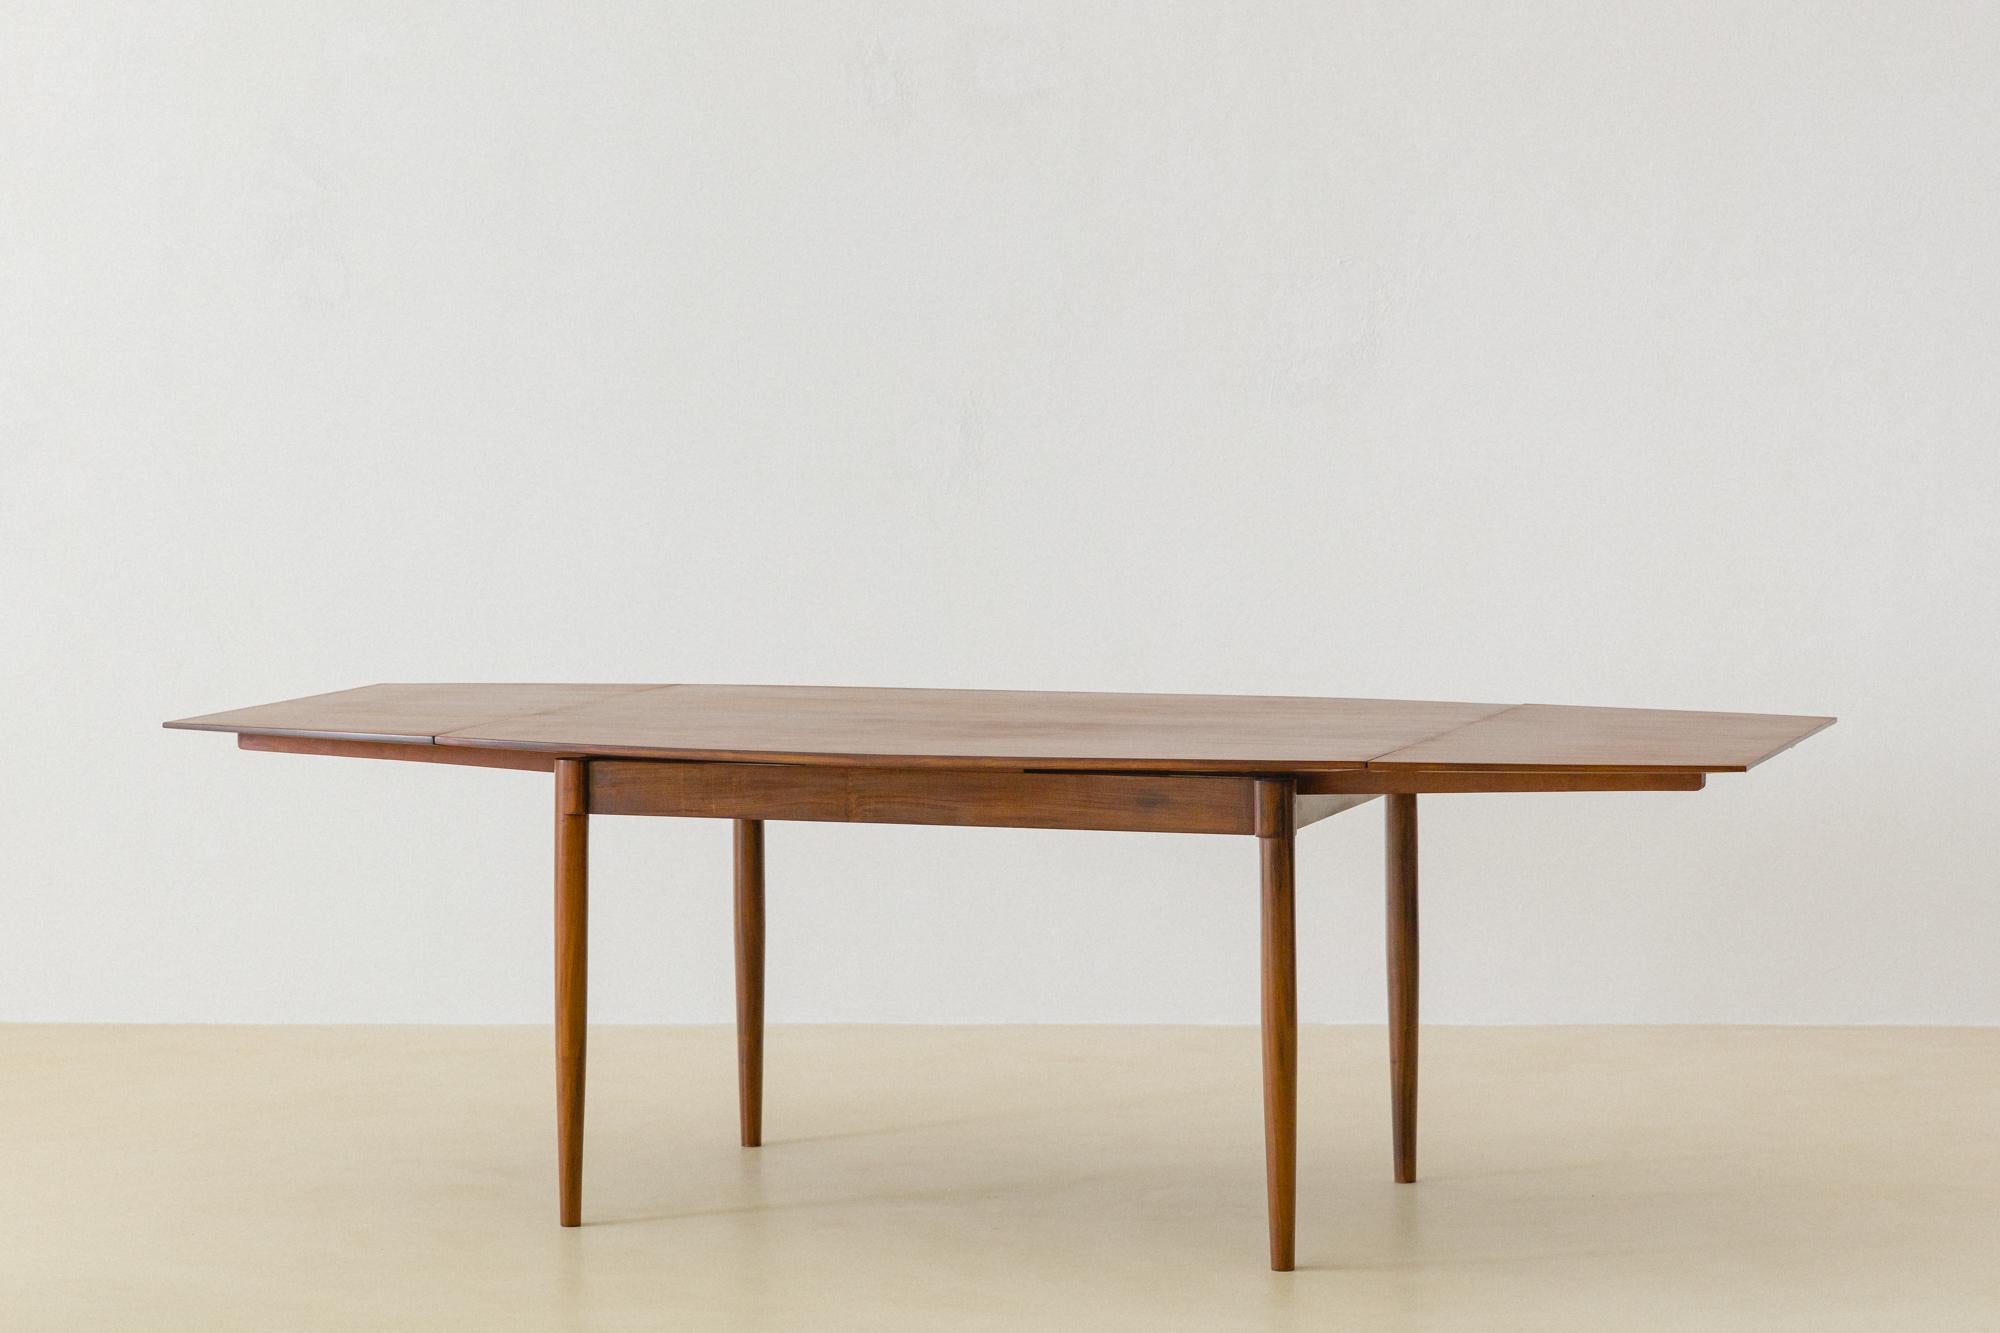 Expandable Dining Table in Caviuna by Carlo Hauner, Brazilian Midcentury, 1950s For Sale 1